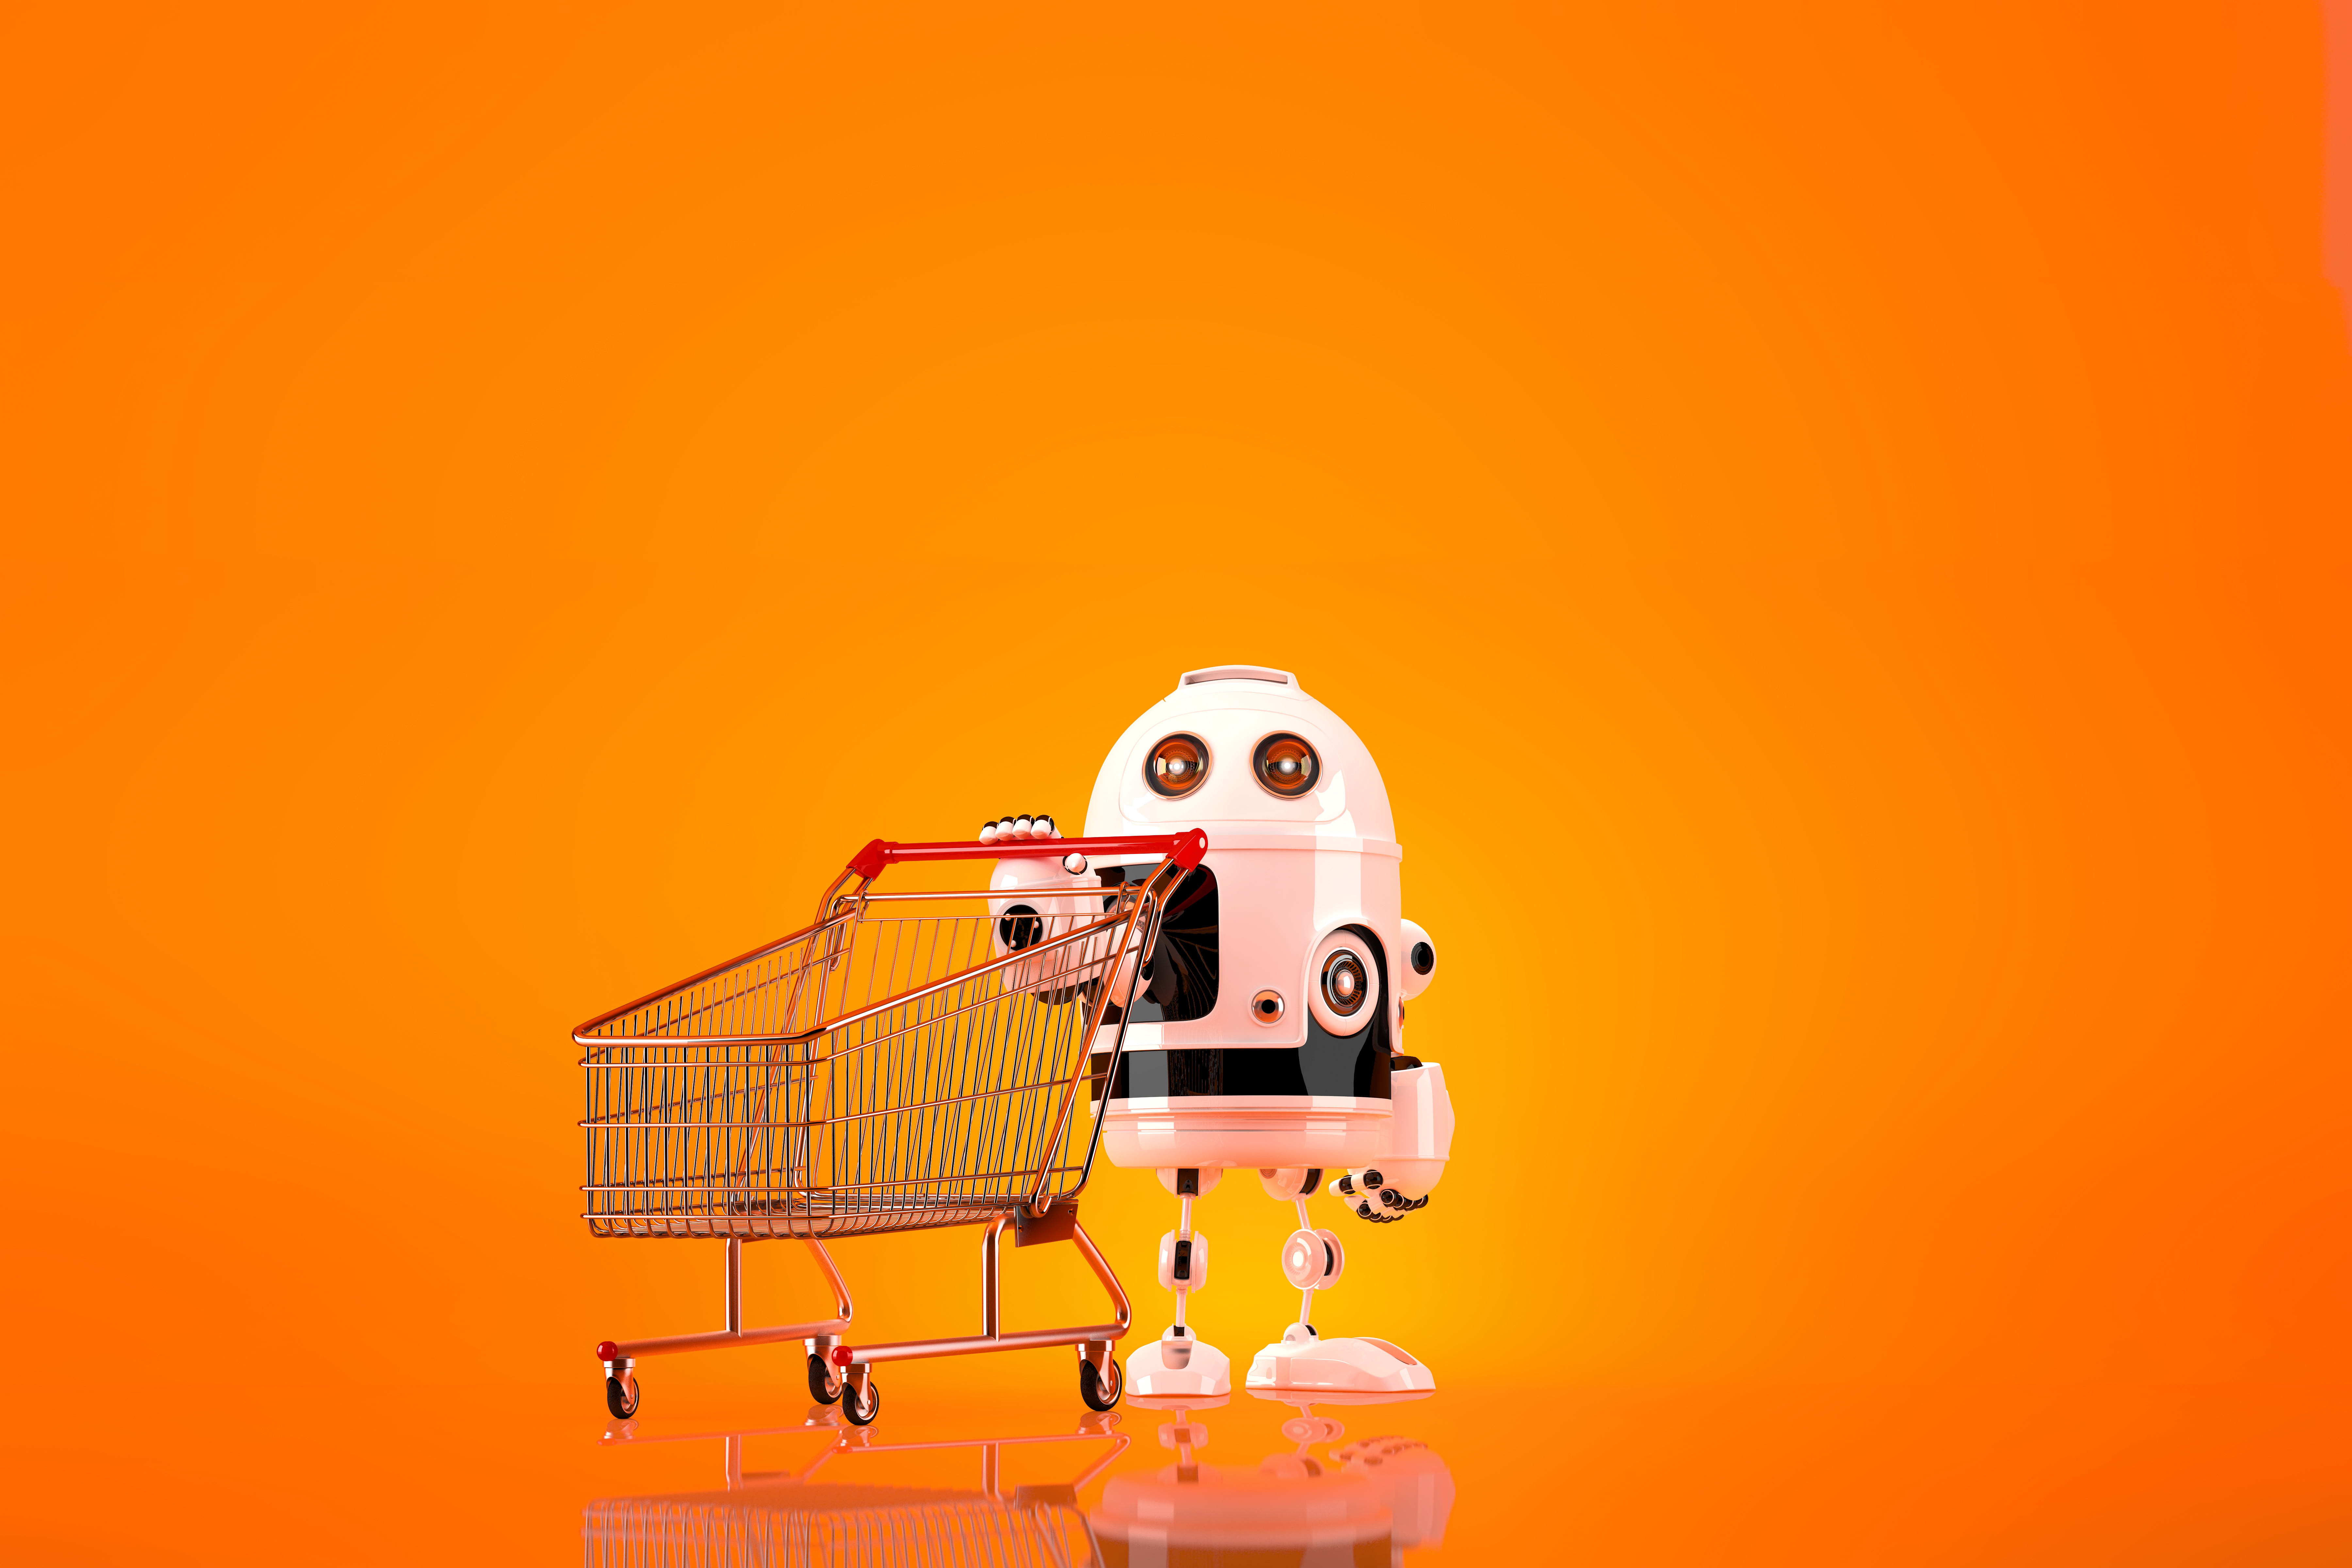 Image of a robot with shopping cart on an orange background.